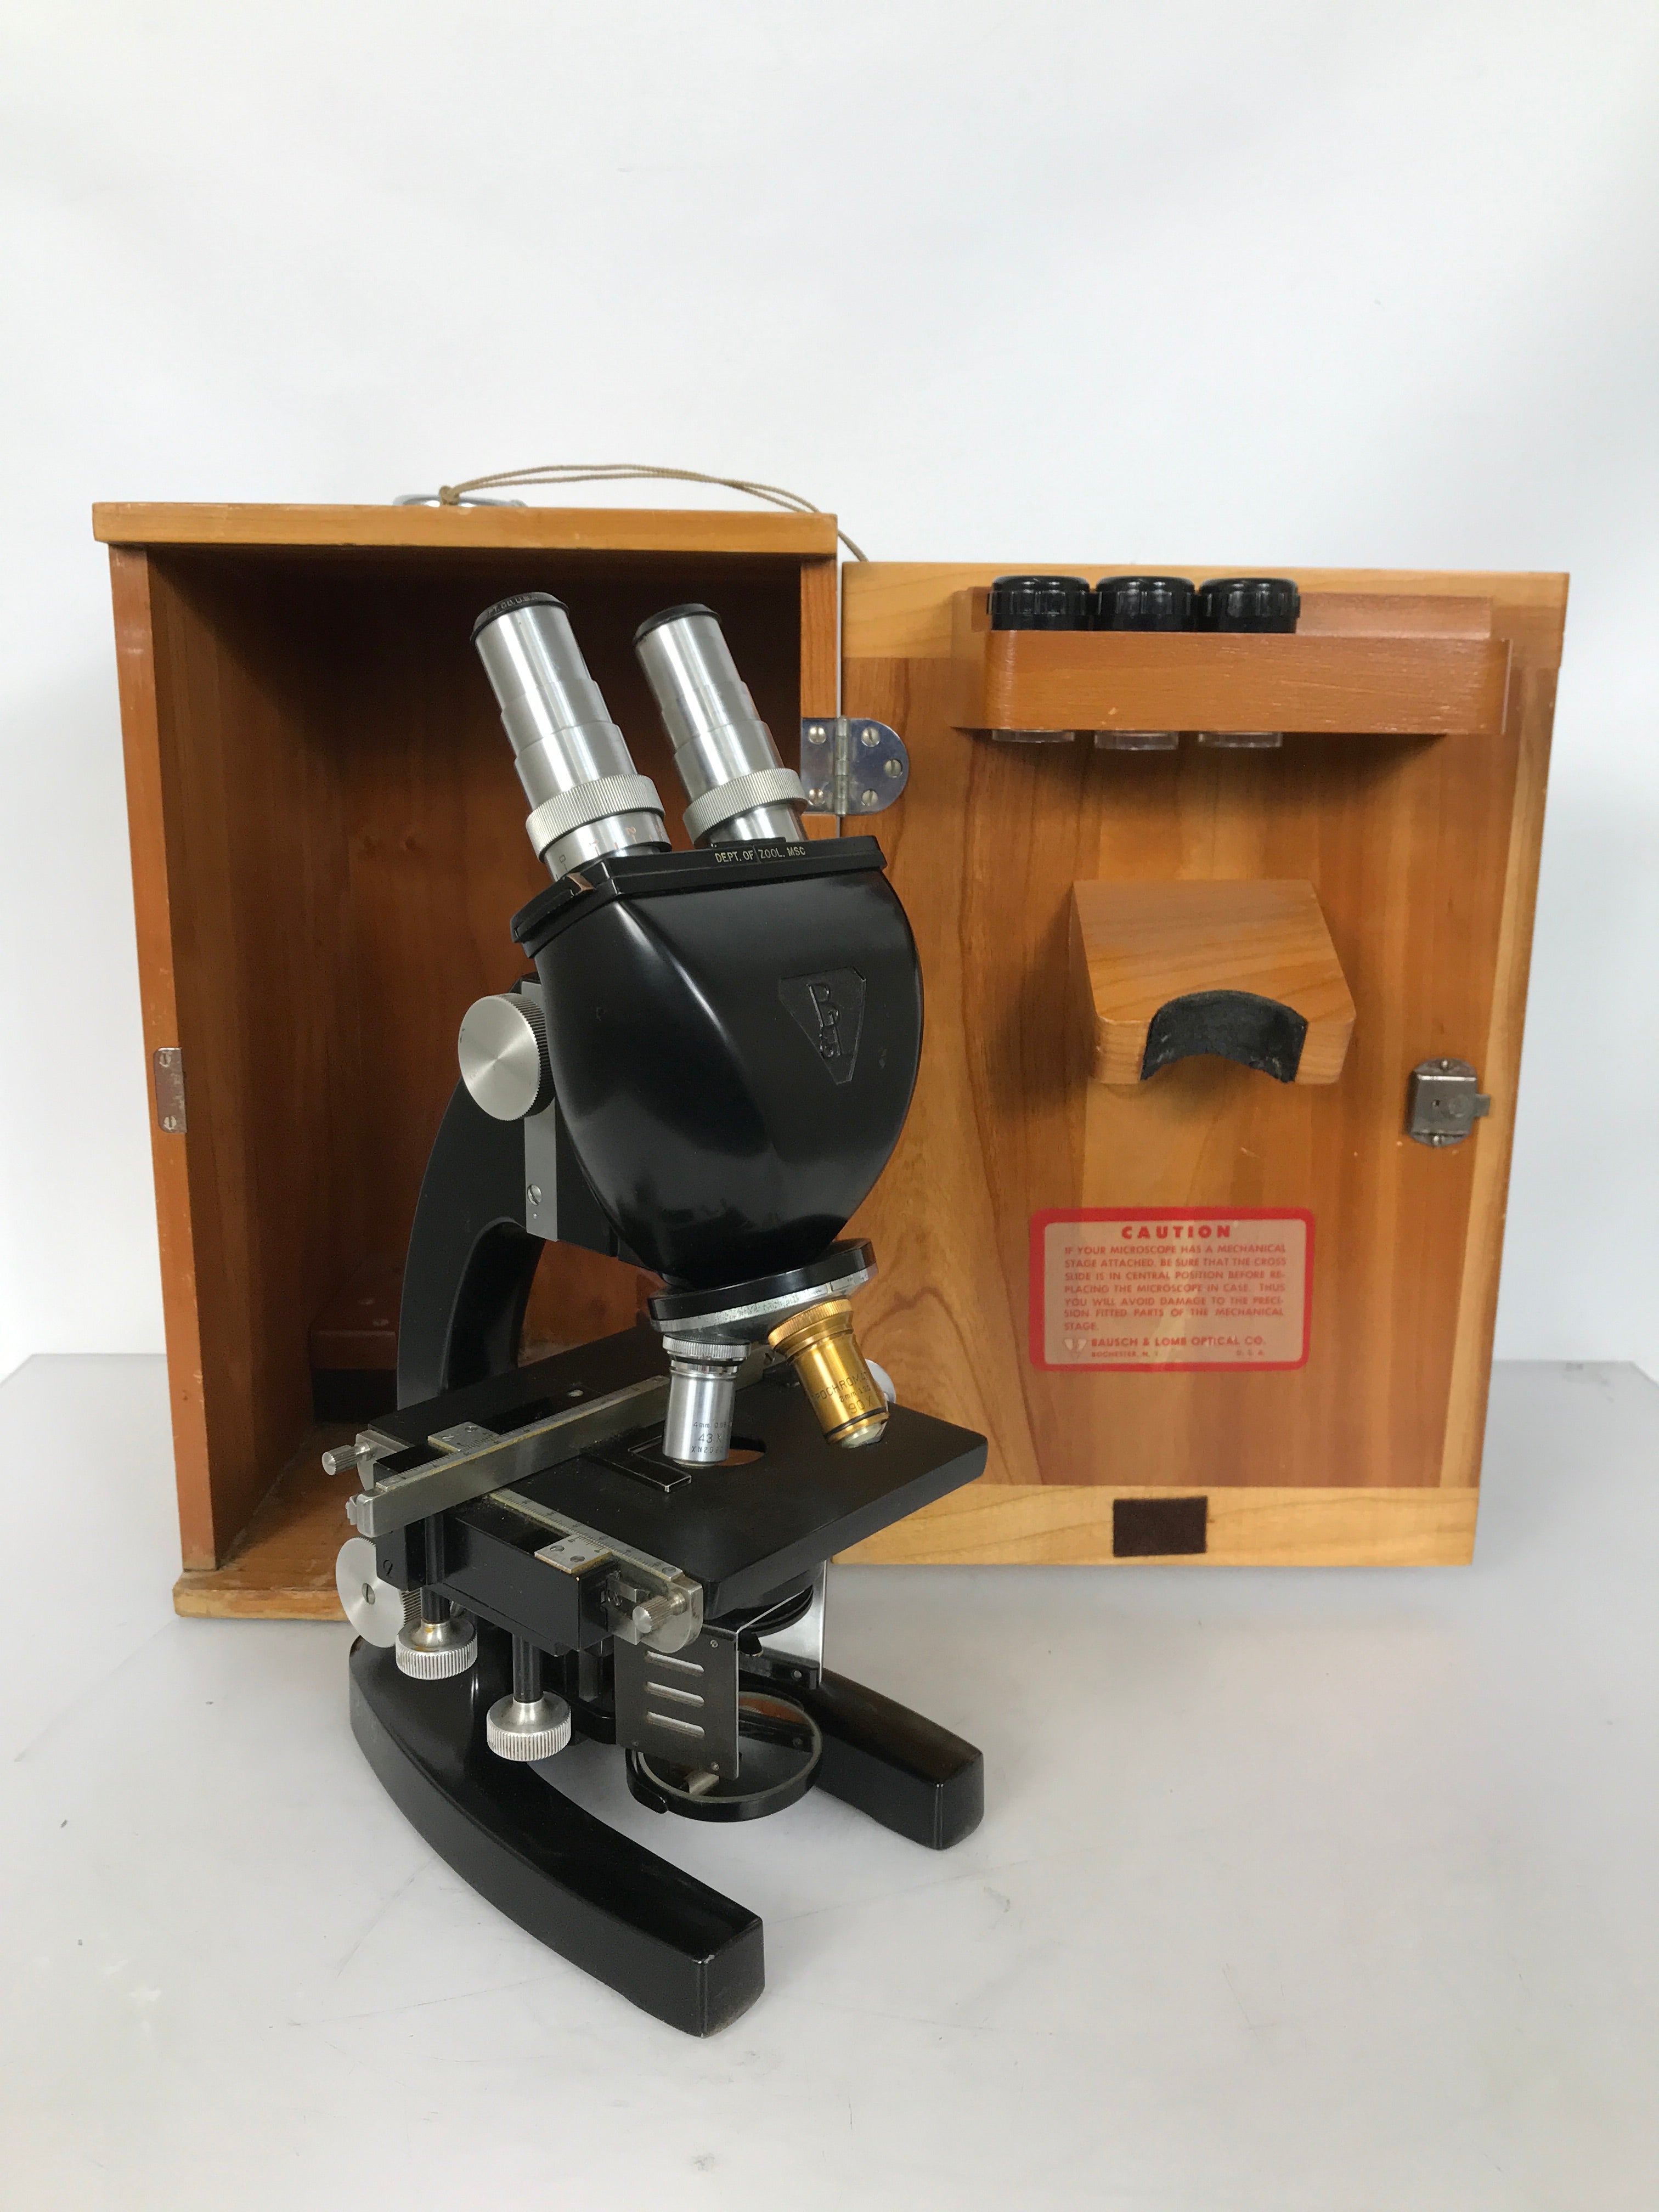 Bausch & Lomb 16033-433 Microscope w/ 3 Objectives & Wooden Box